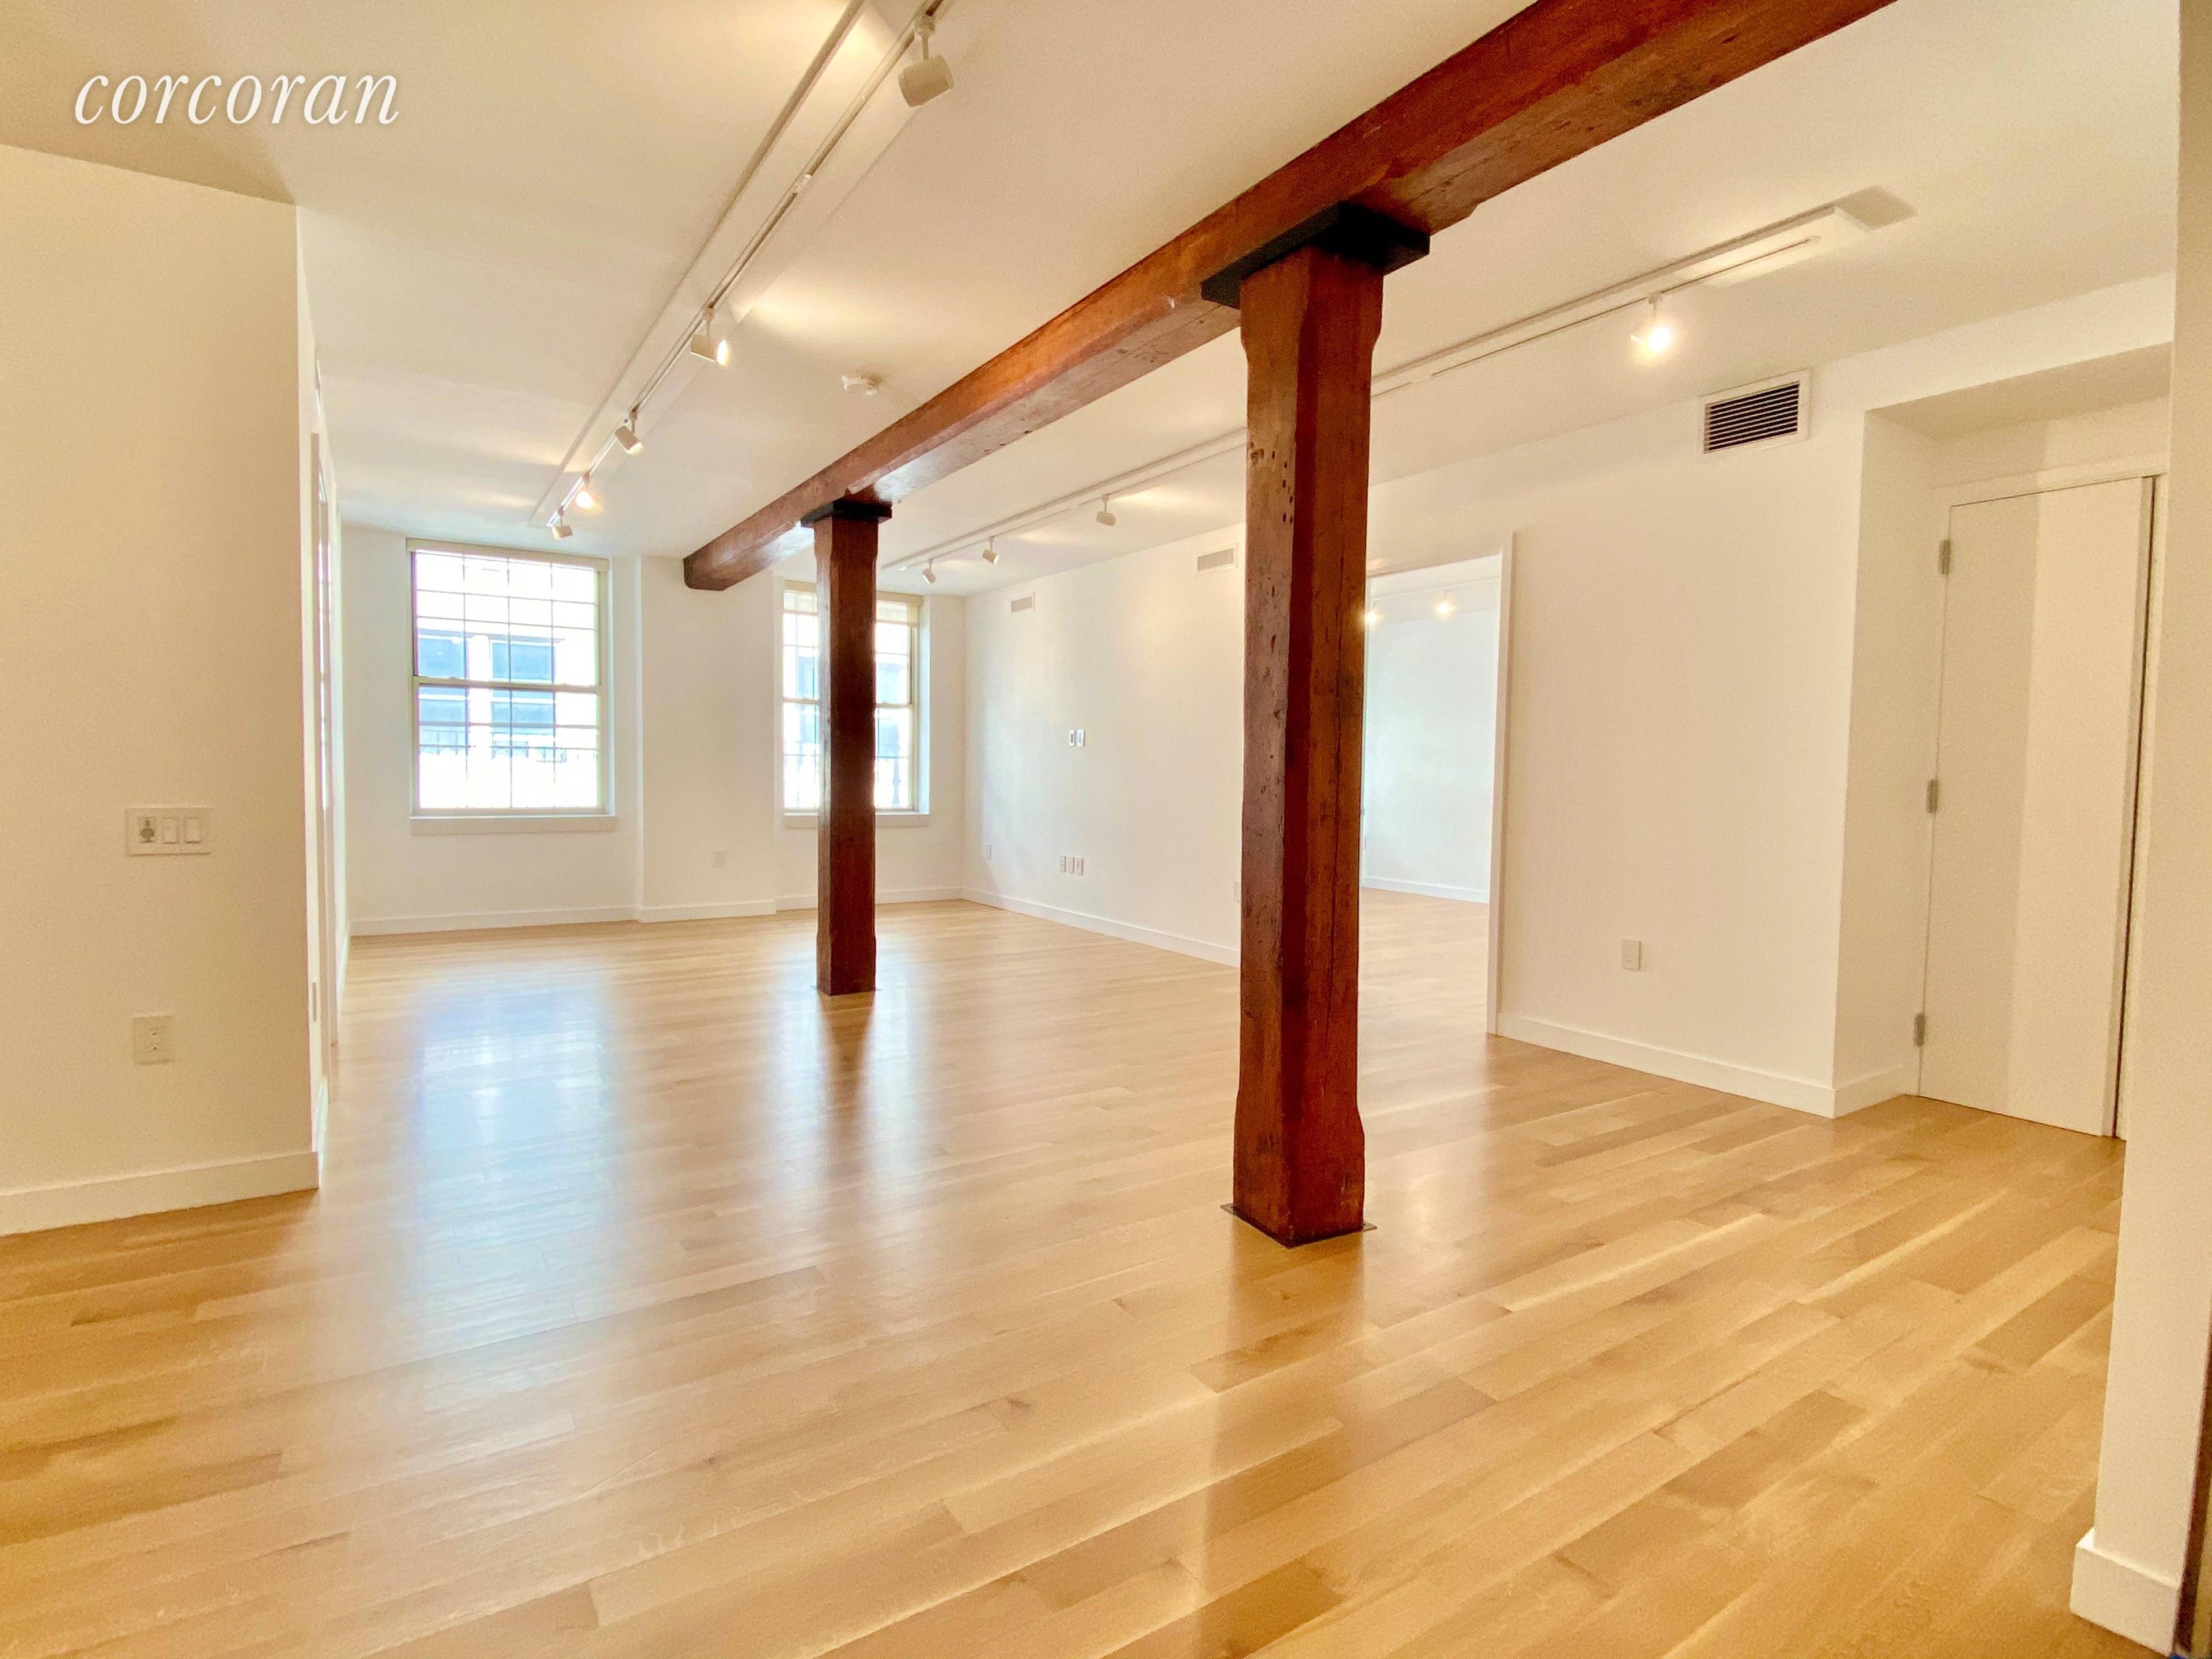 REAL SOHO LOFT ! ! This Brand New Gut Renovated, 2 Bed, 2 full baths is located on Wooster between Prince amp ; Houston in a boutique Loft Elevator Building.